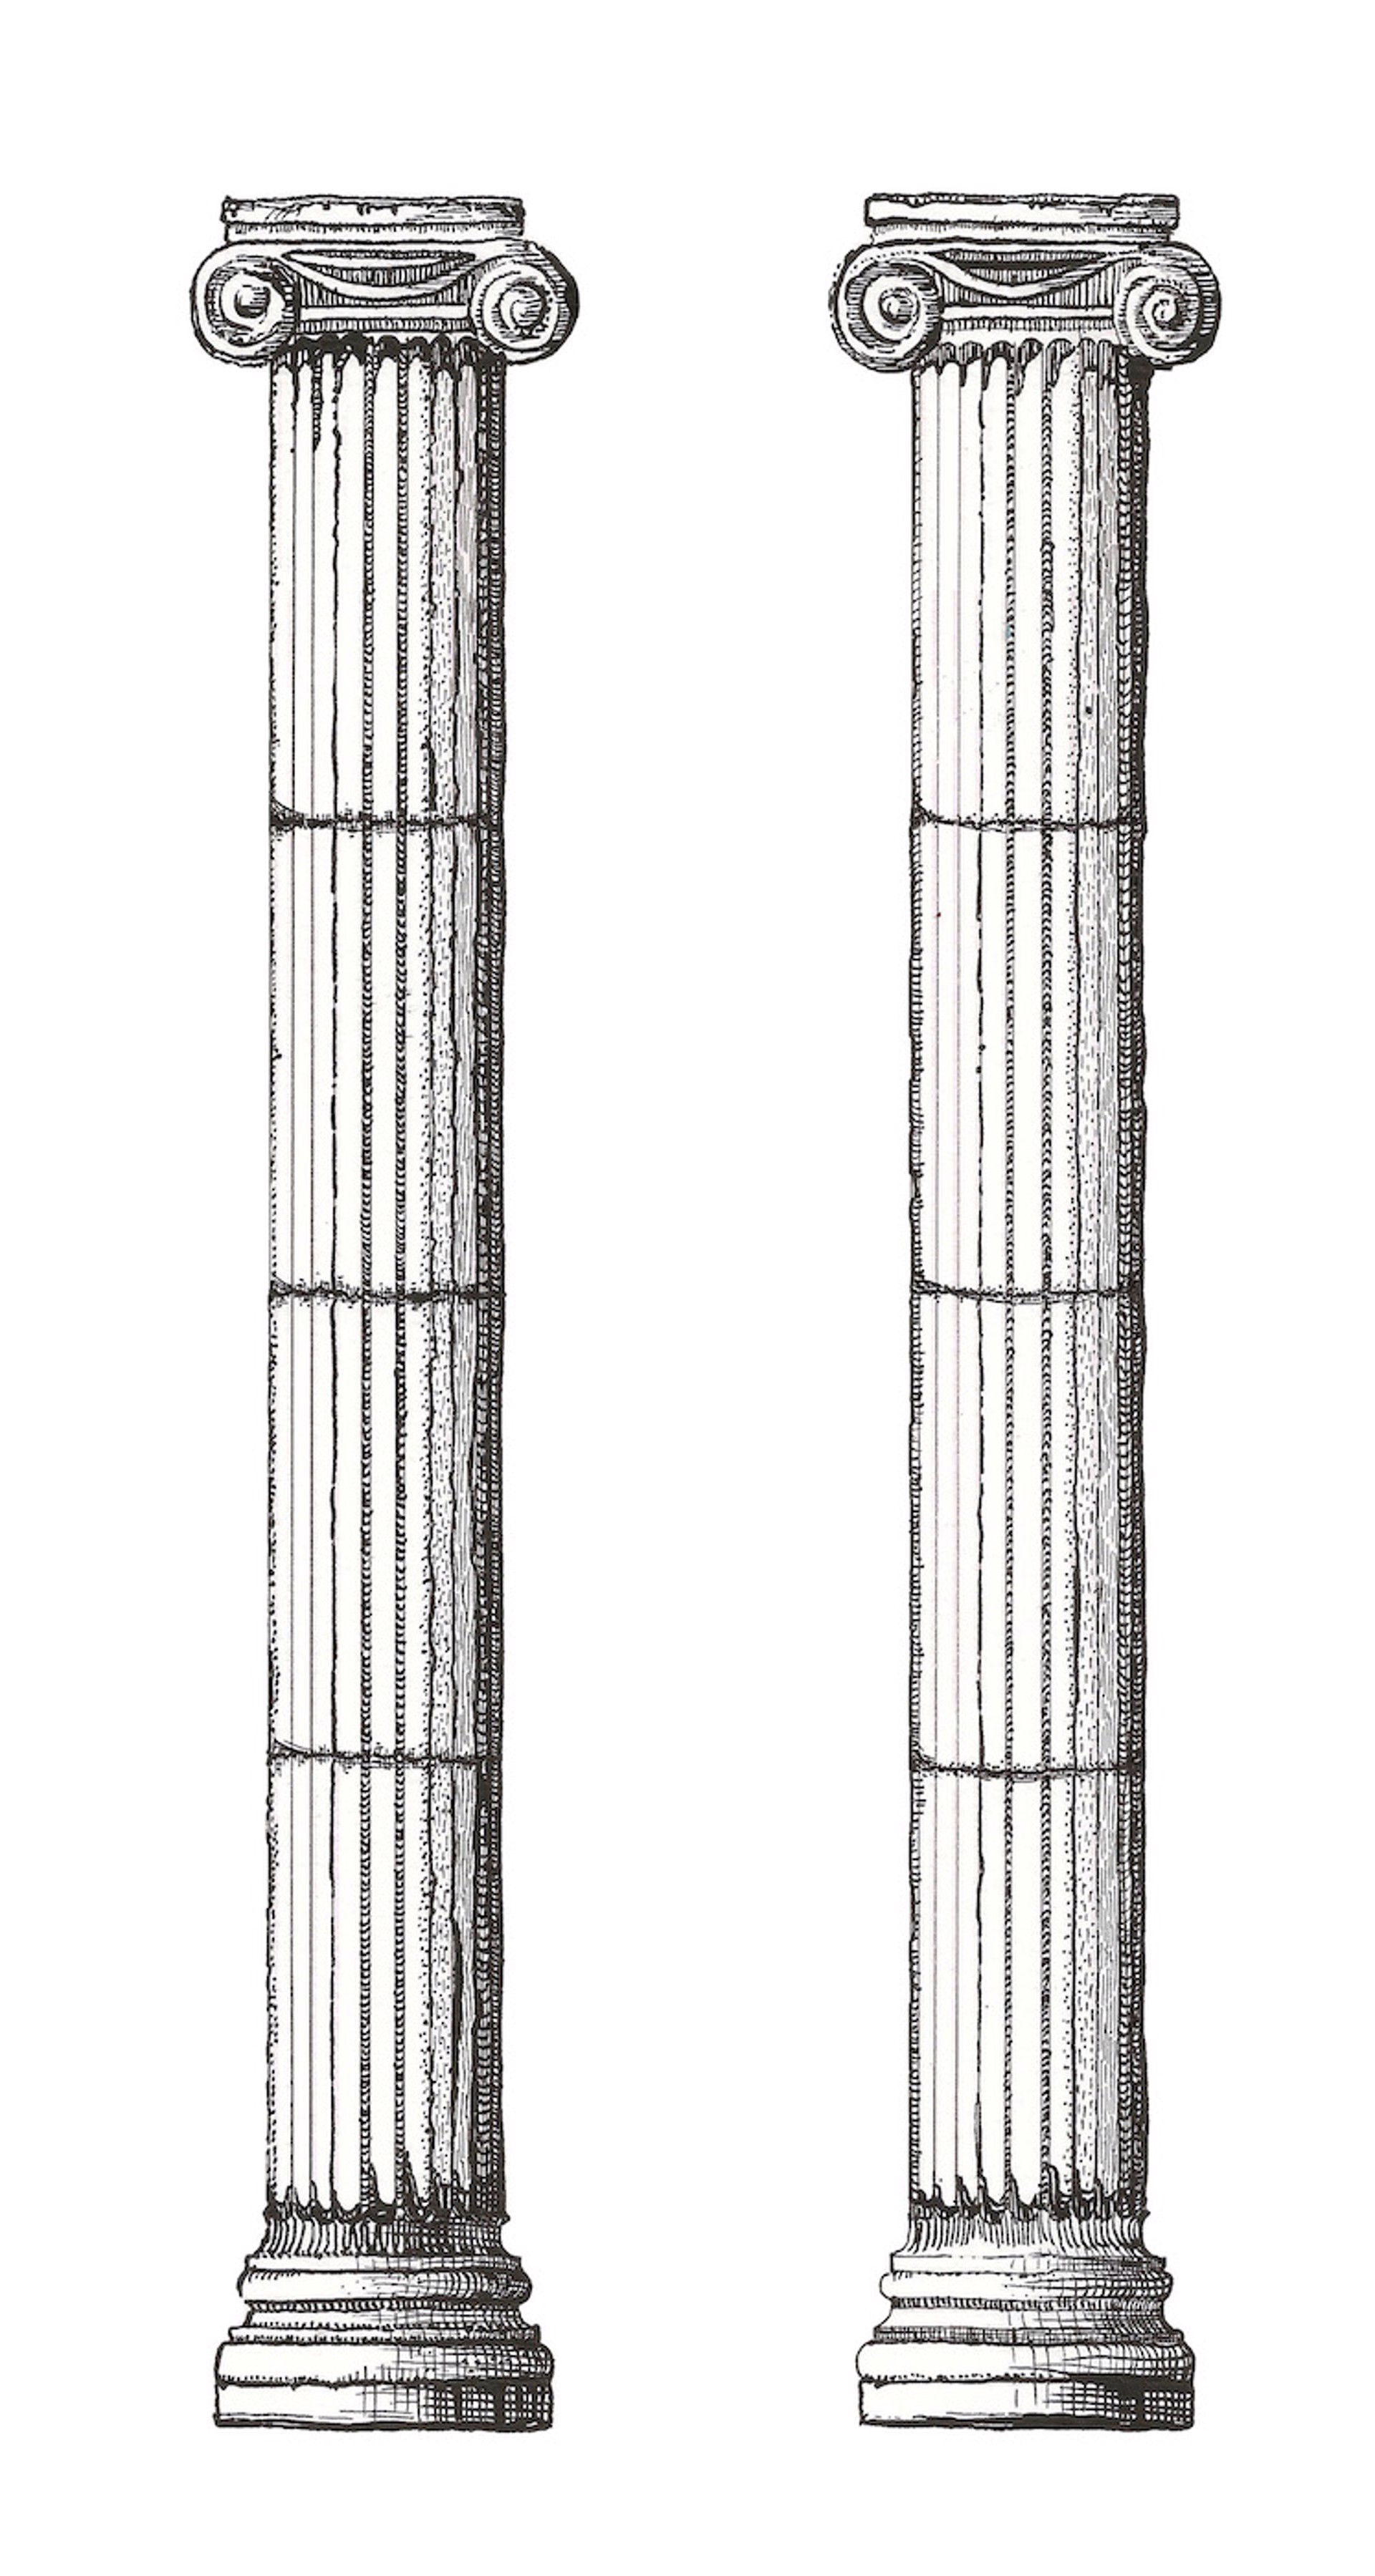 Study of Ionic Columns by Missy Dunaway